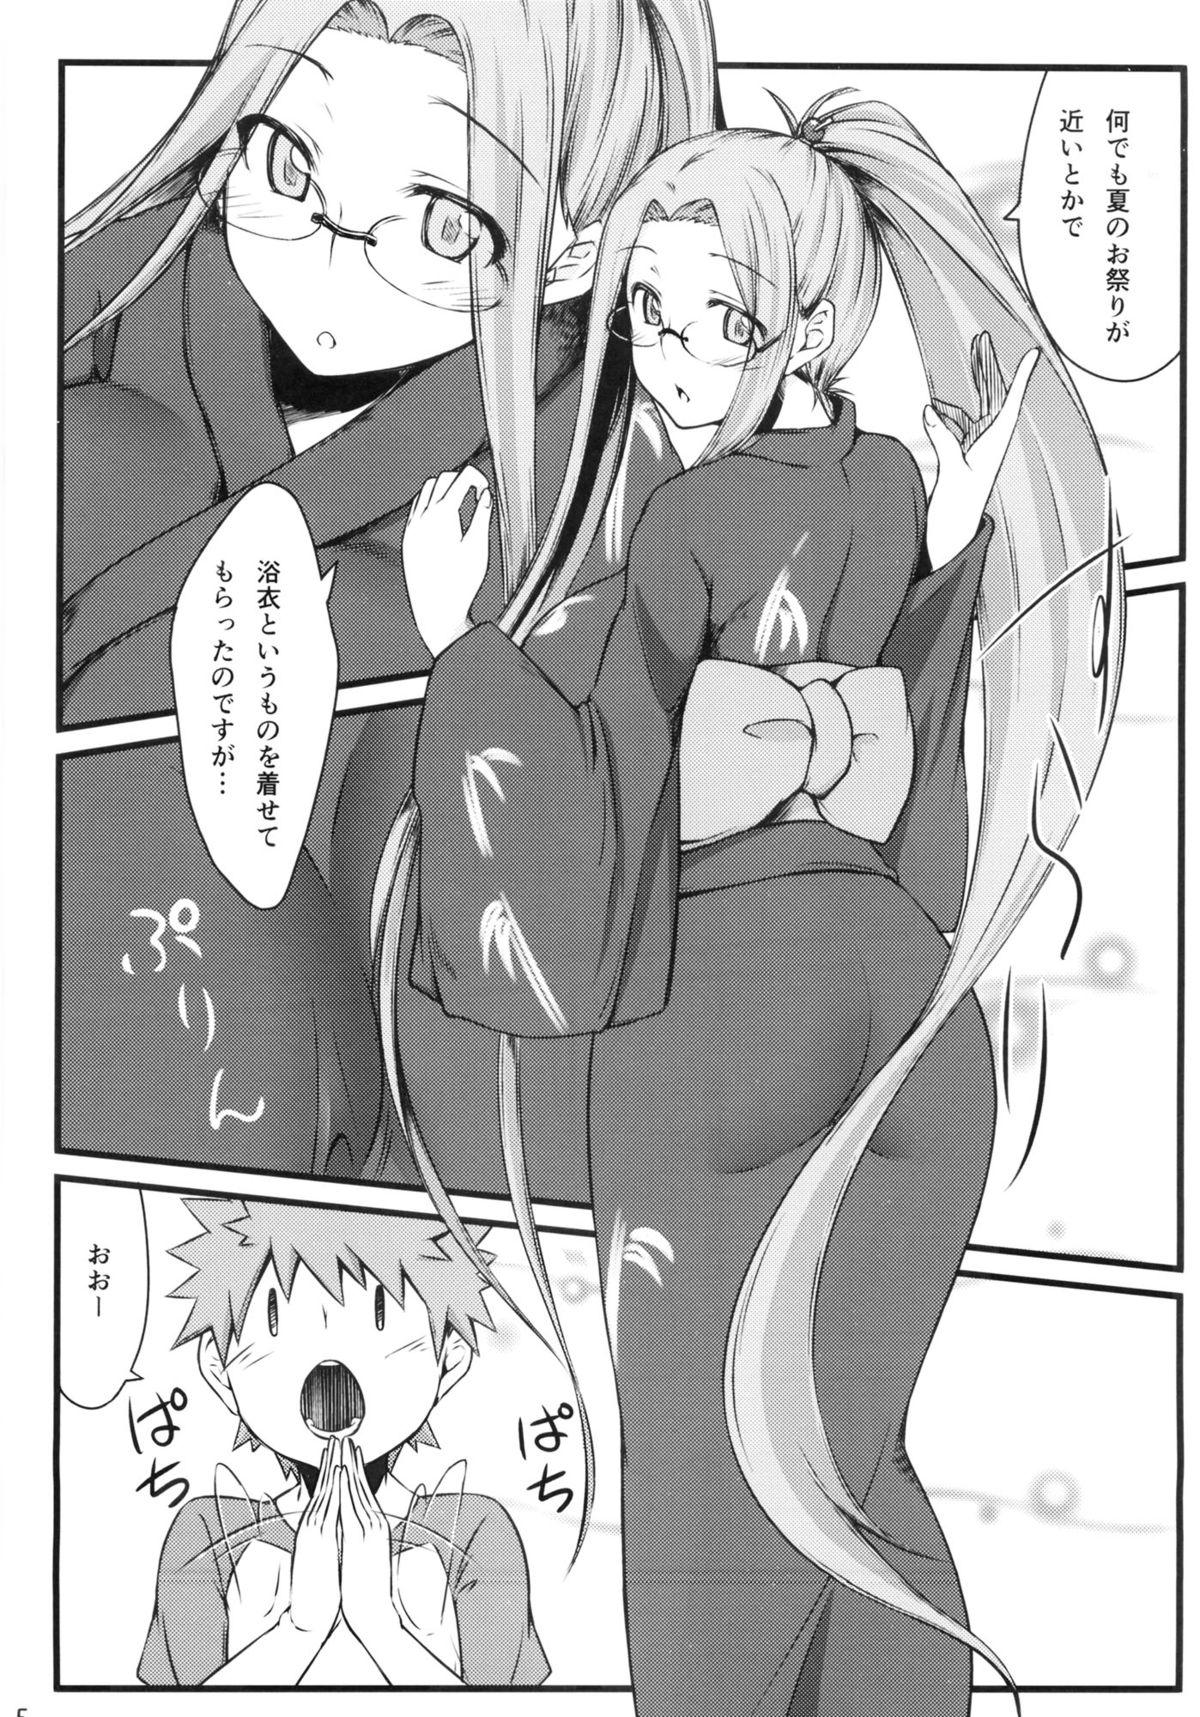 Sexy Whores R8 - Fate hollow ataraxia Work - Page 4